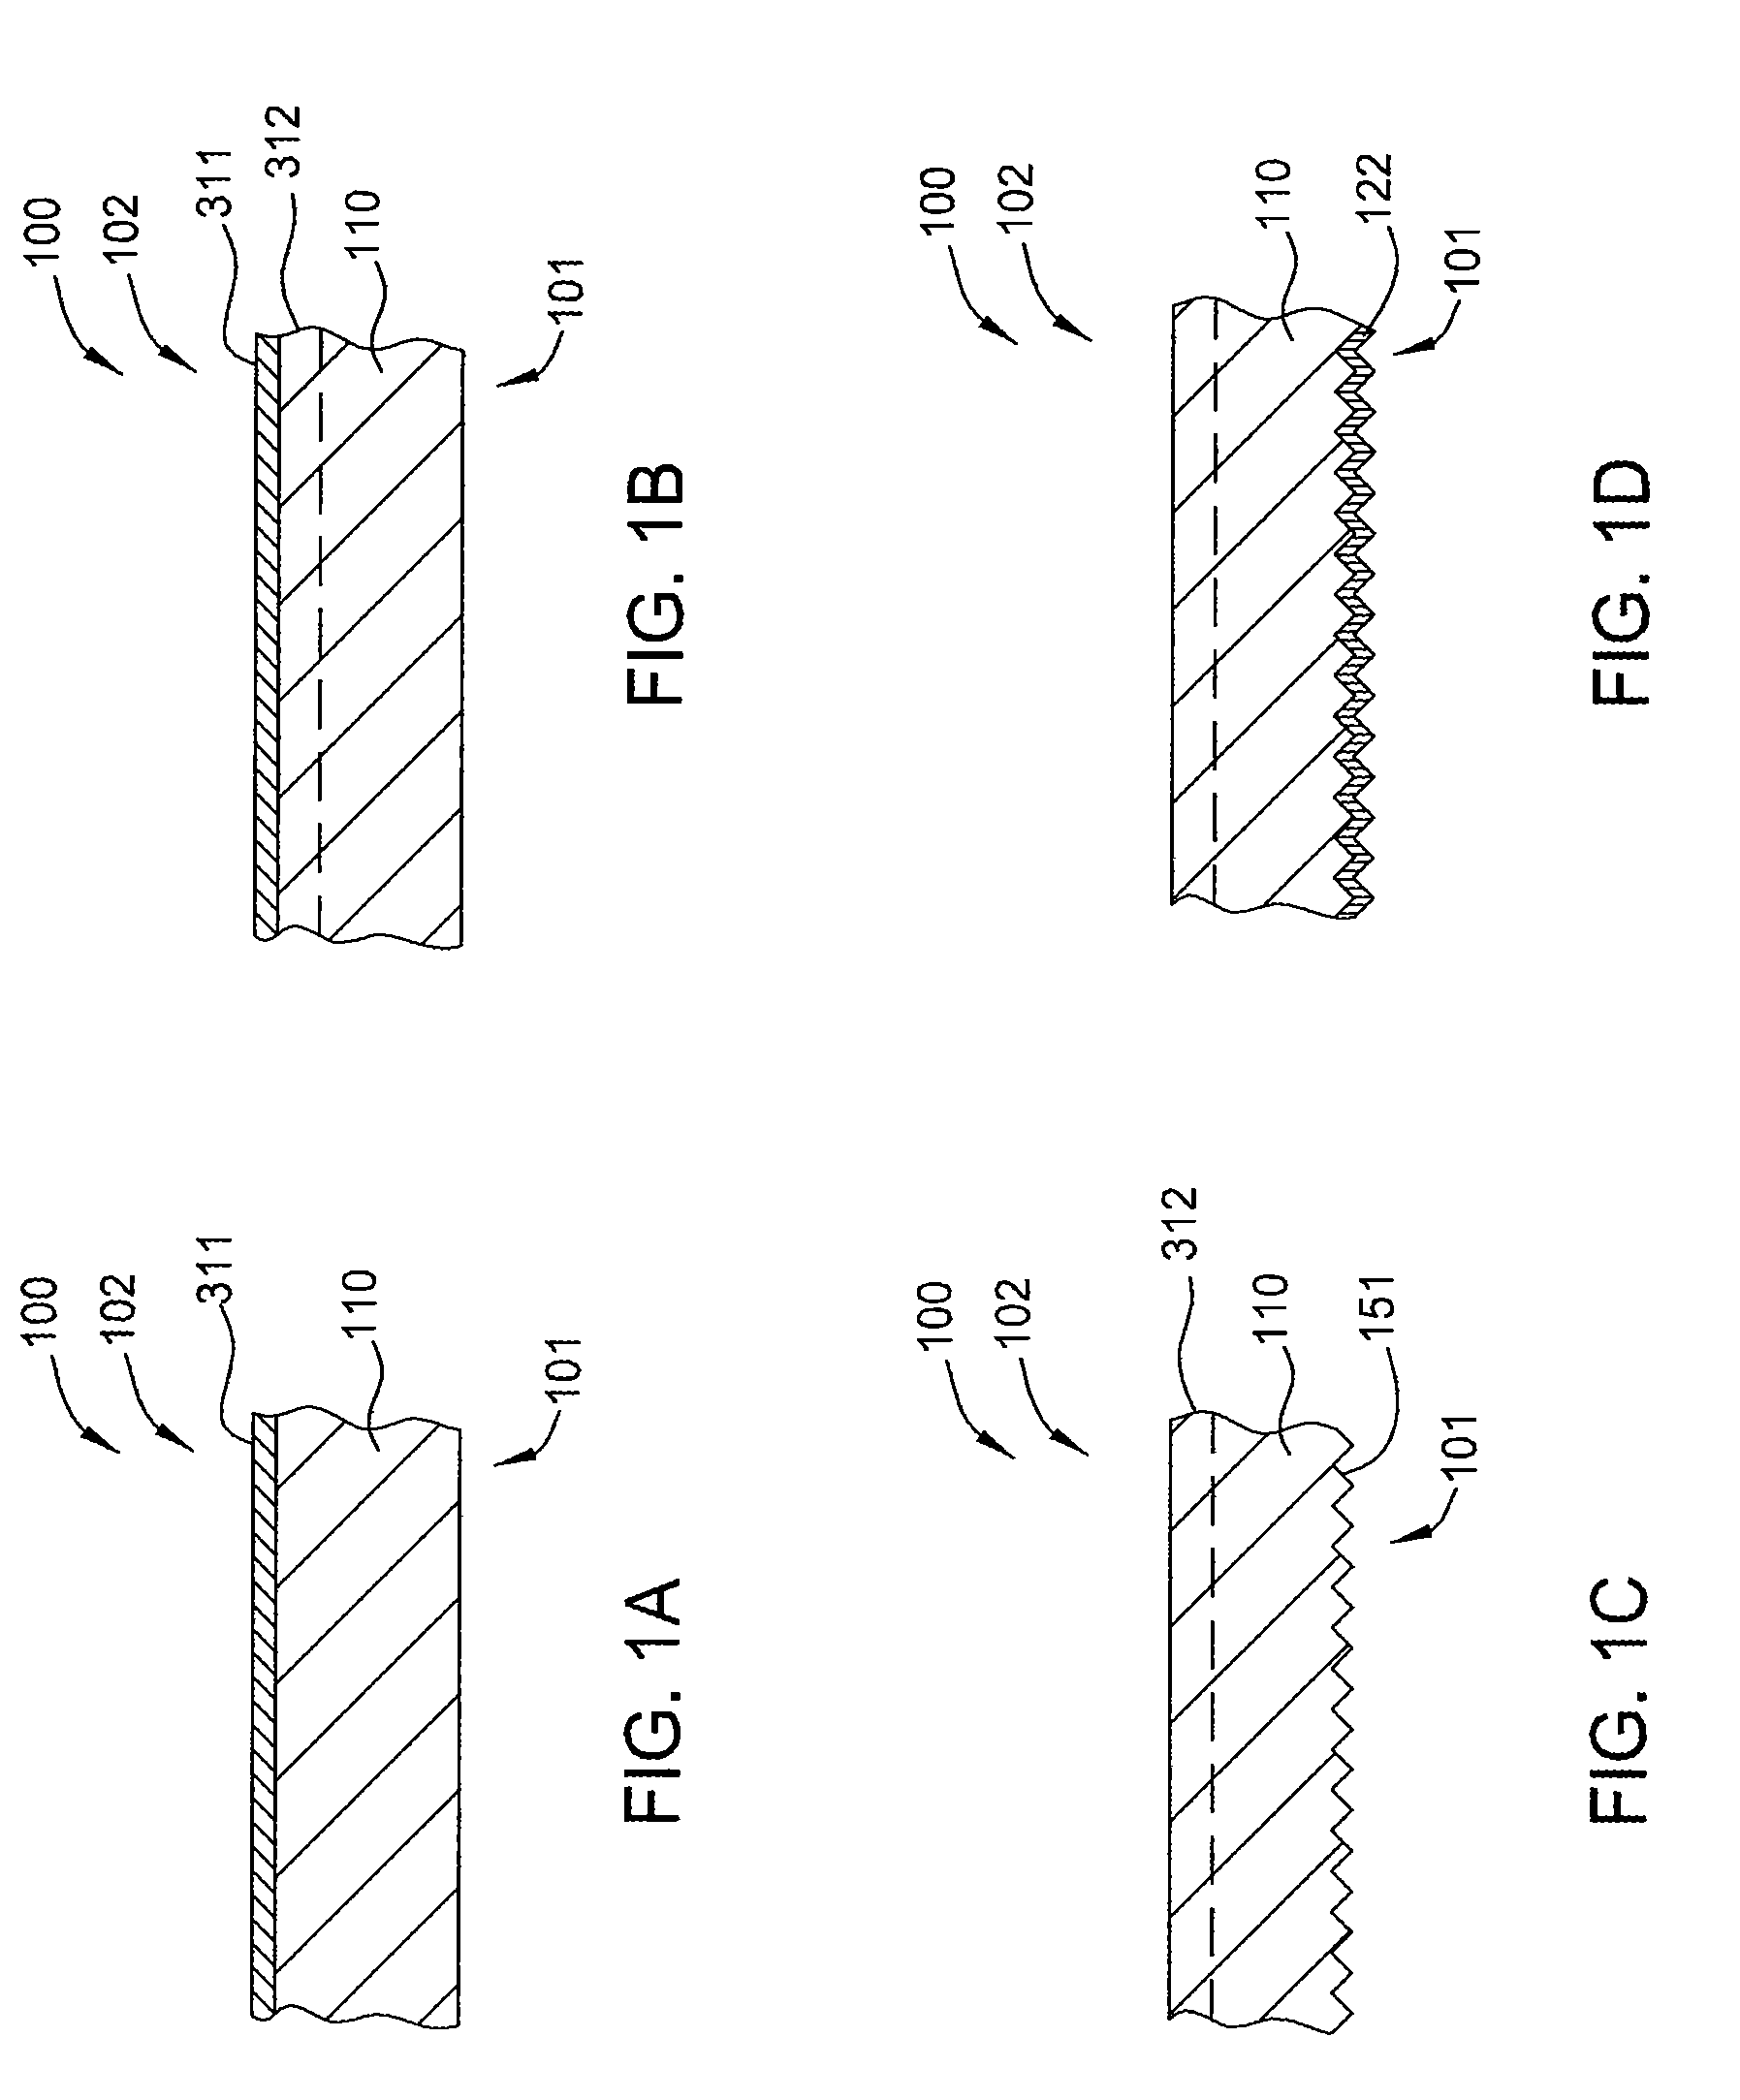 Hybrid heterojunction solar cell fabrication using a doping layer mask